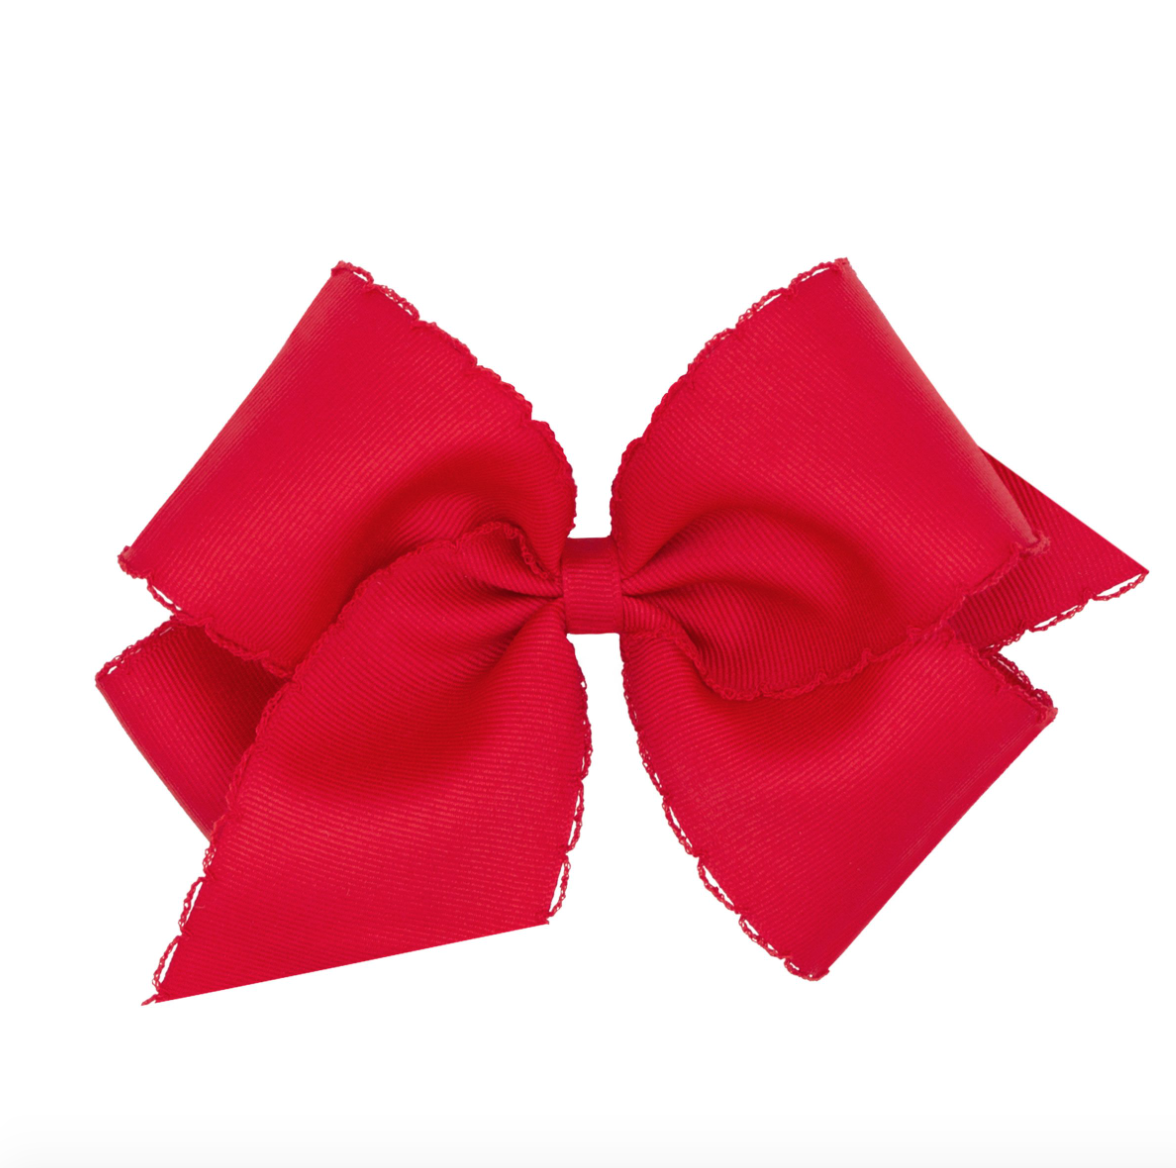 King Grosgrain Bows with Matching Moonstitch Edges